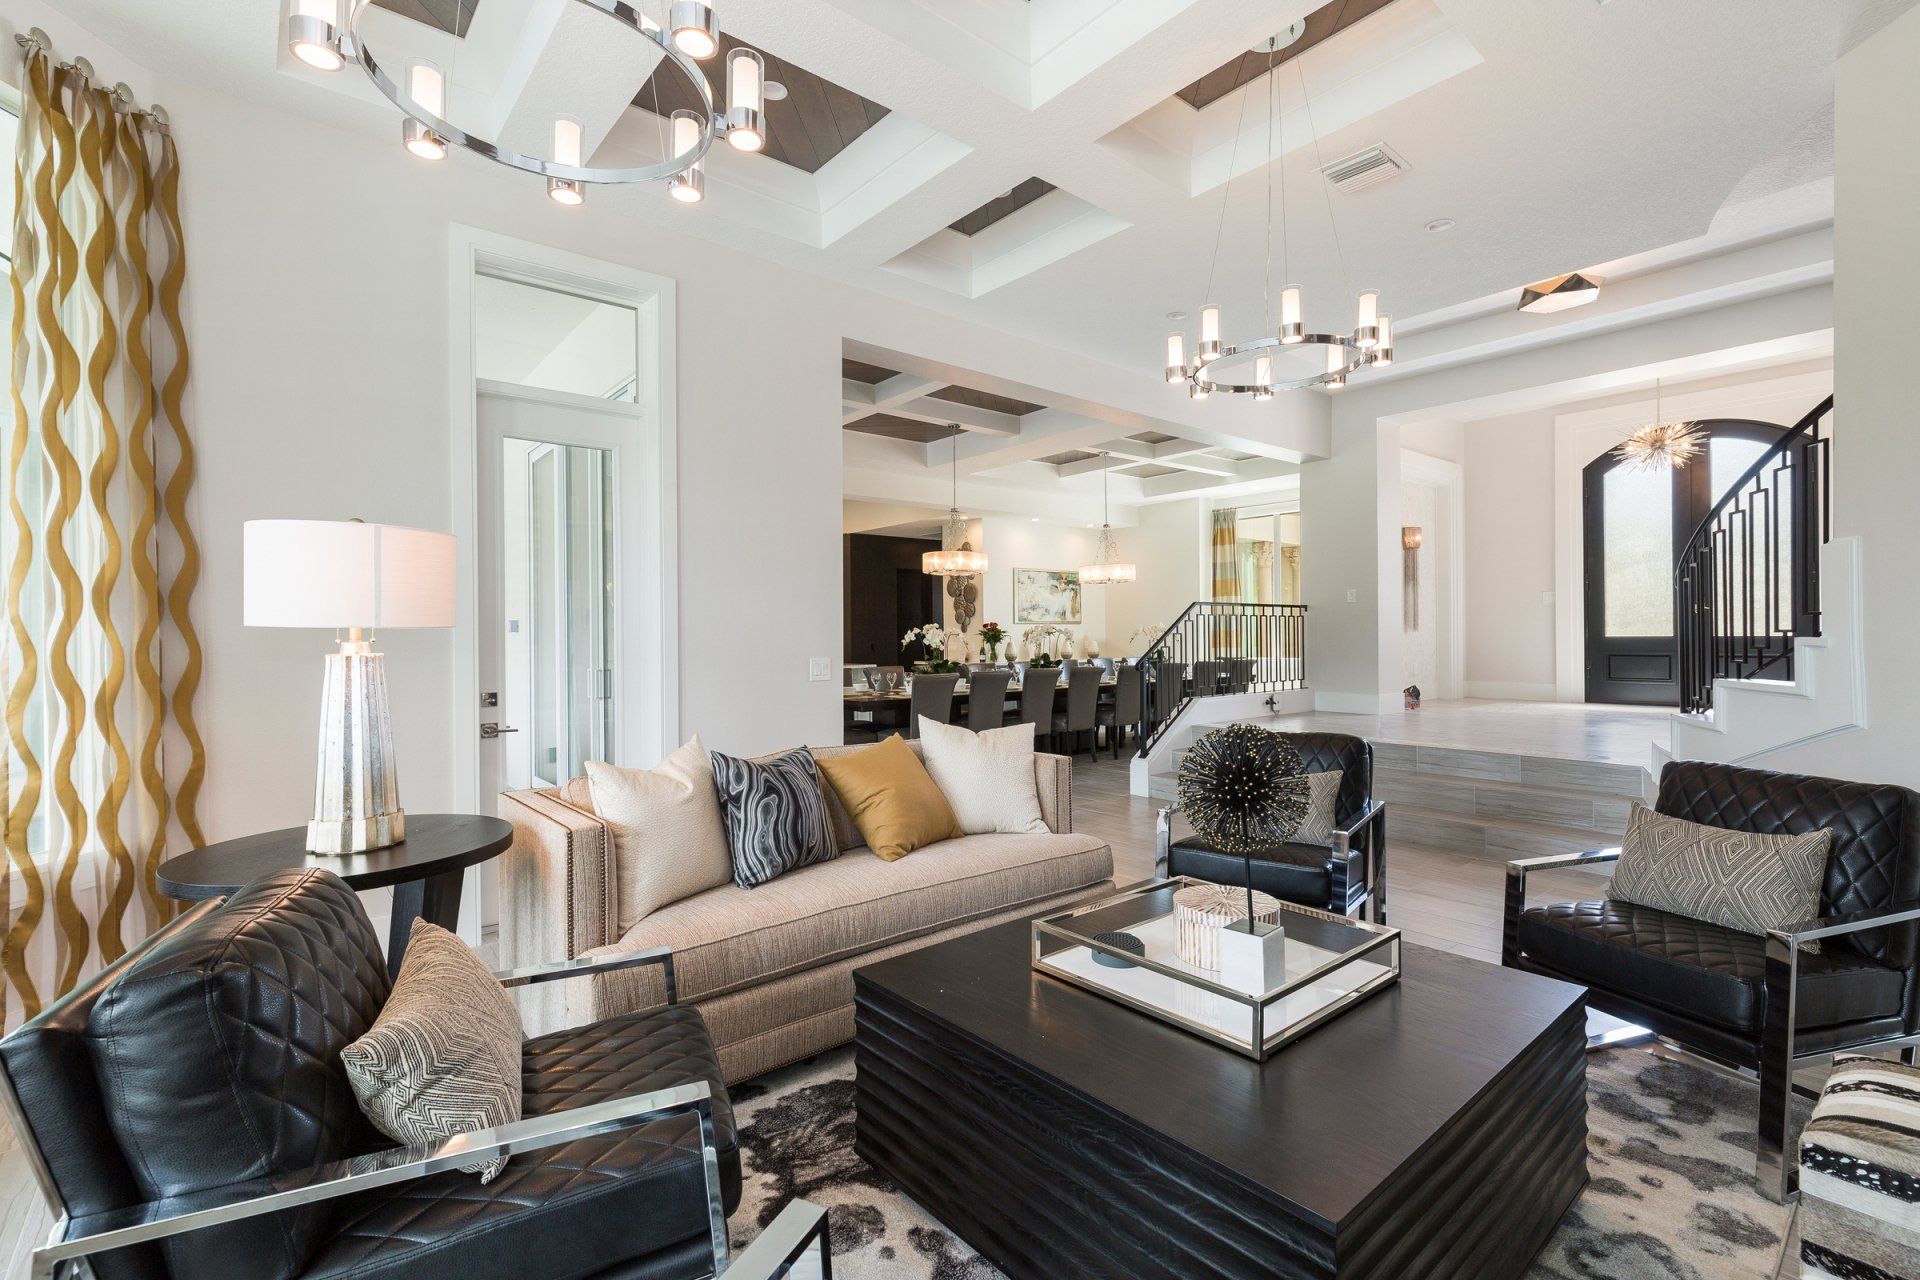 a living room with a couch, chairs, coffee table and chandelier